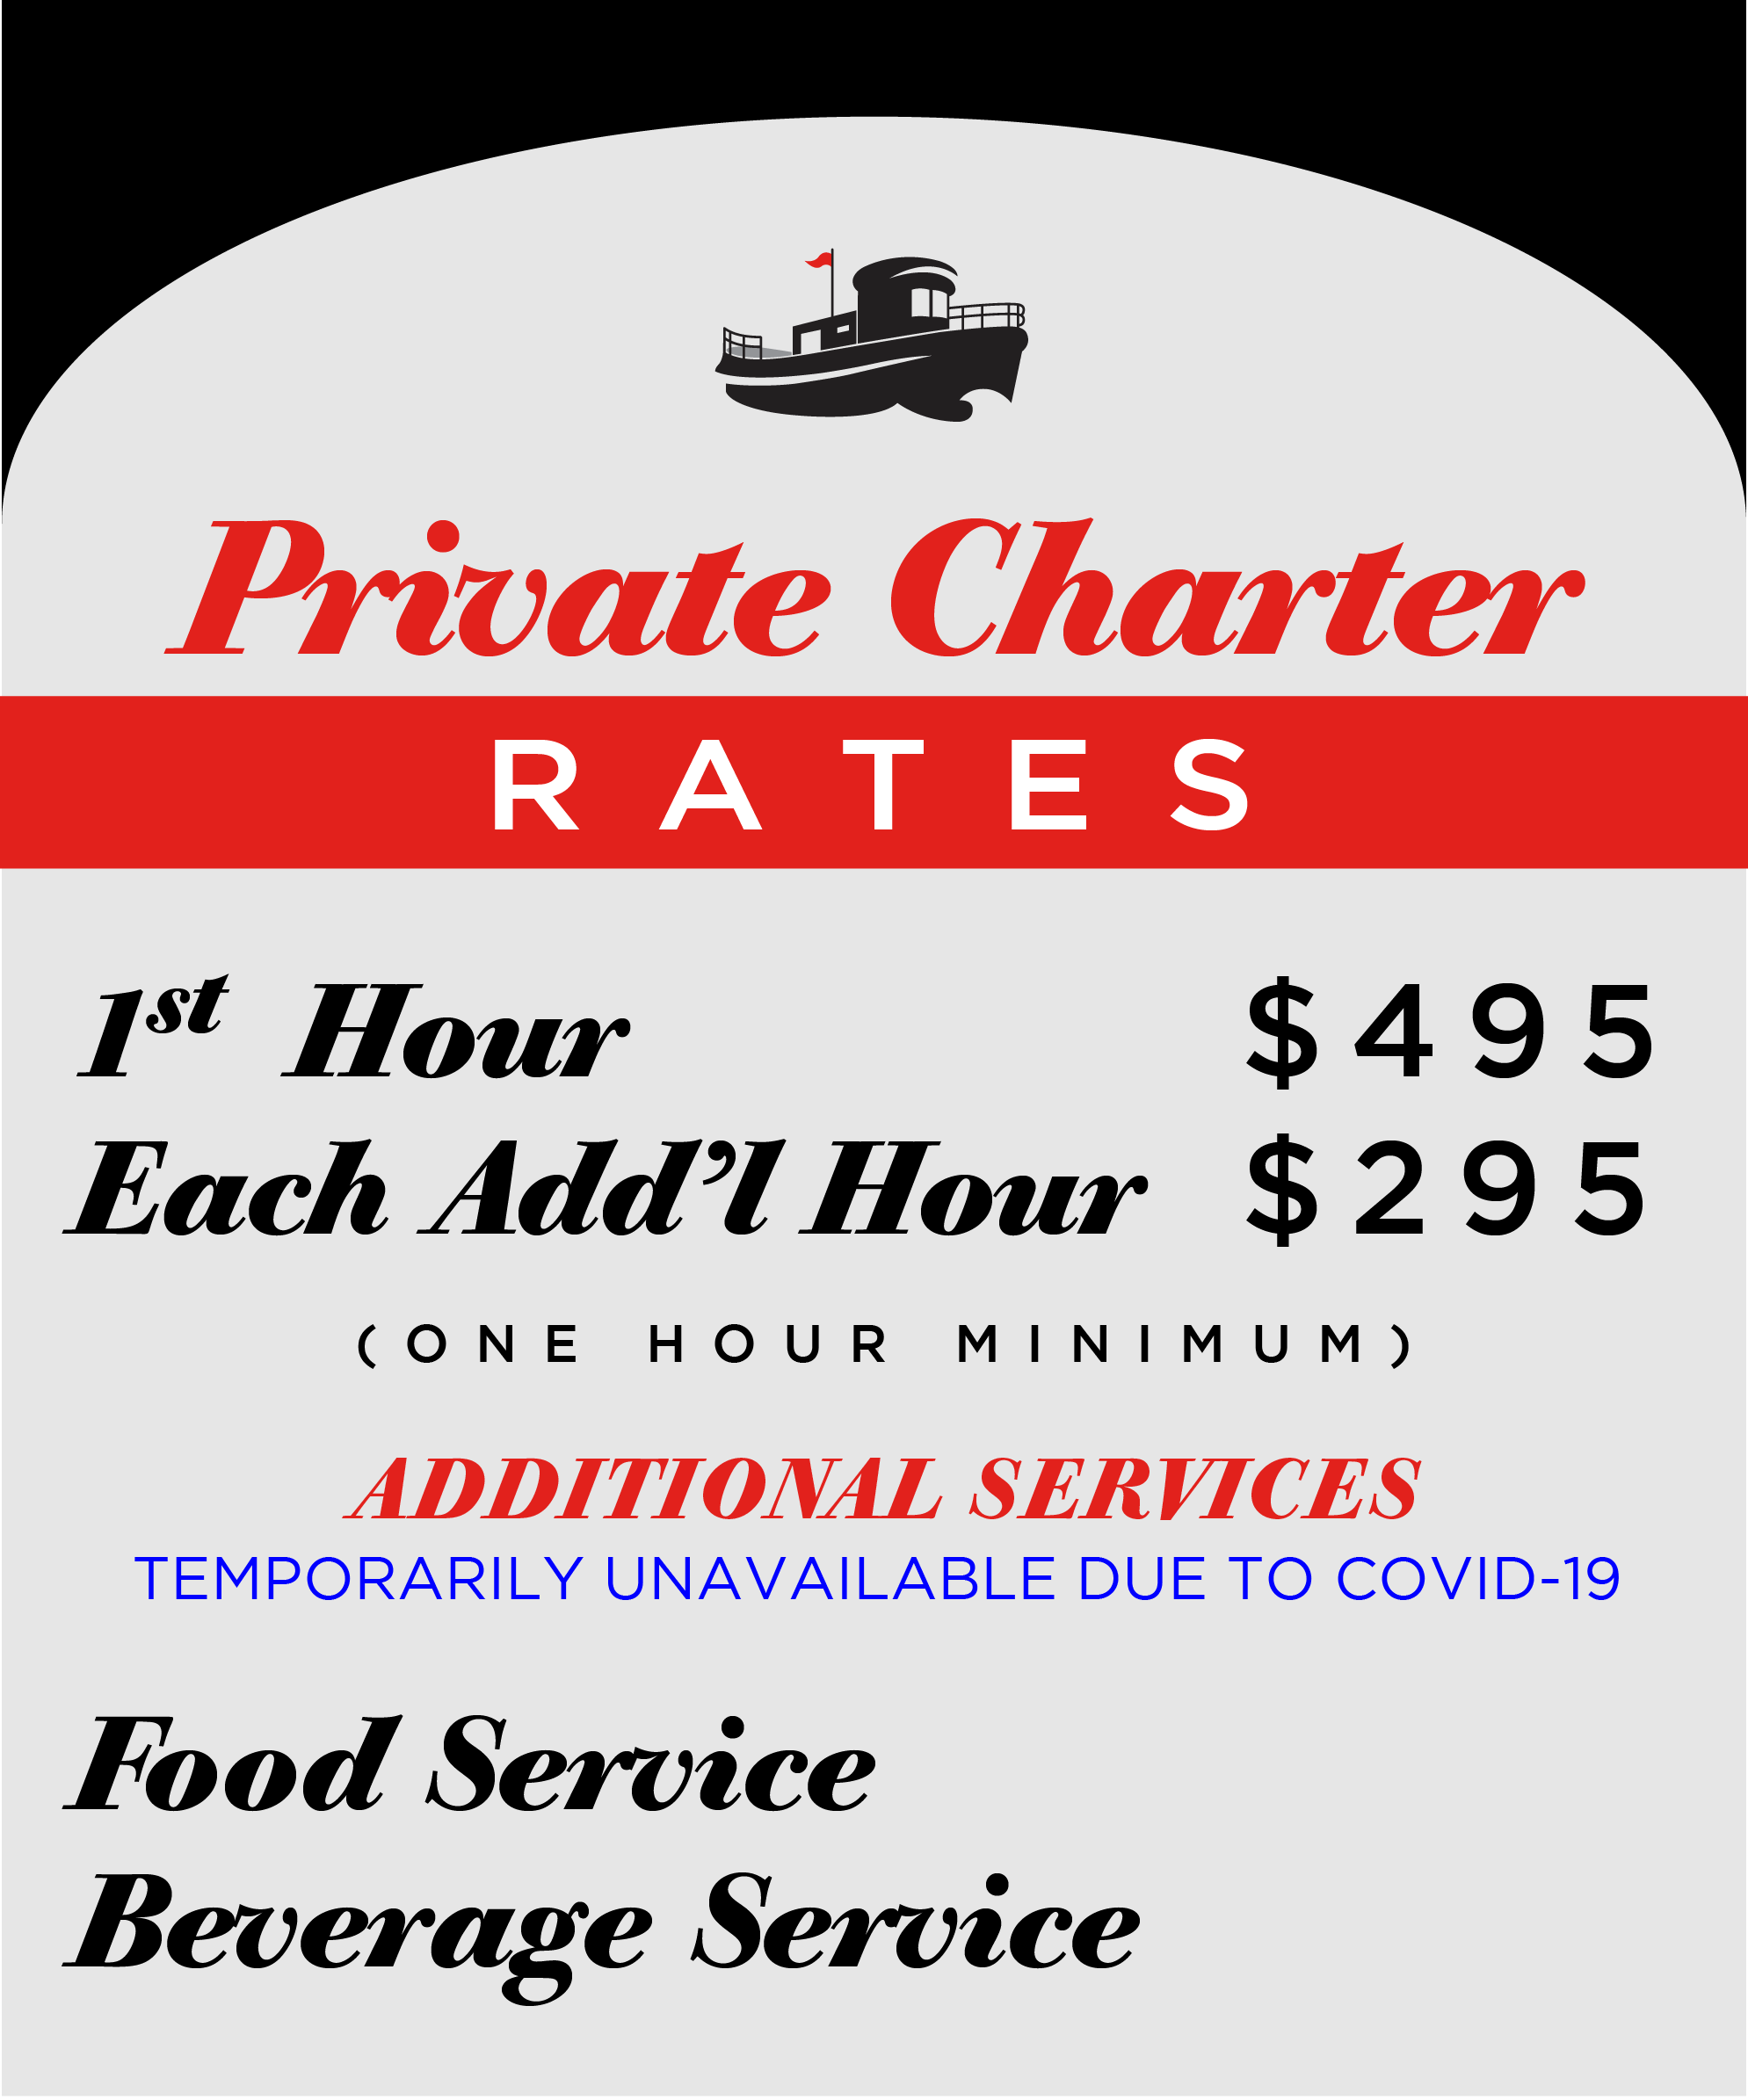 Private Charter Rates